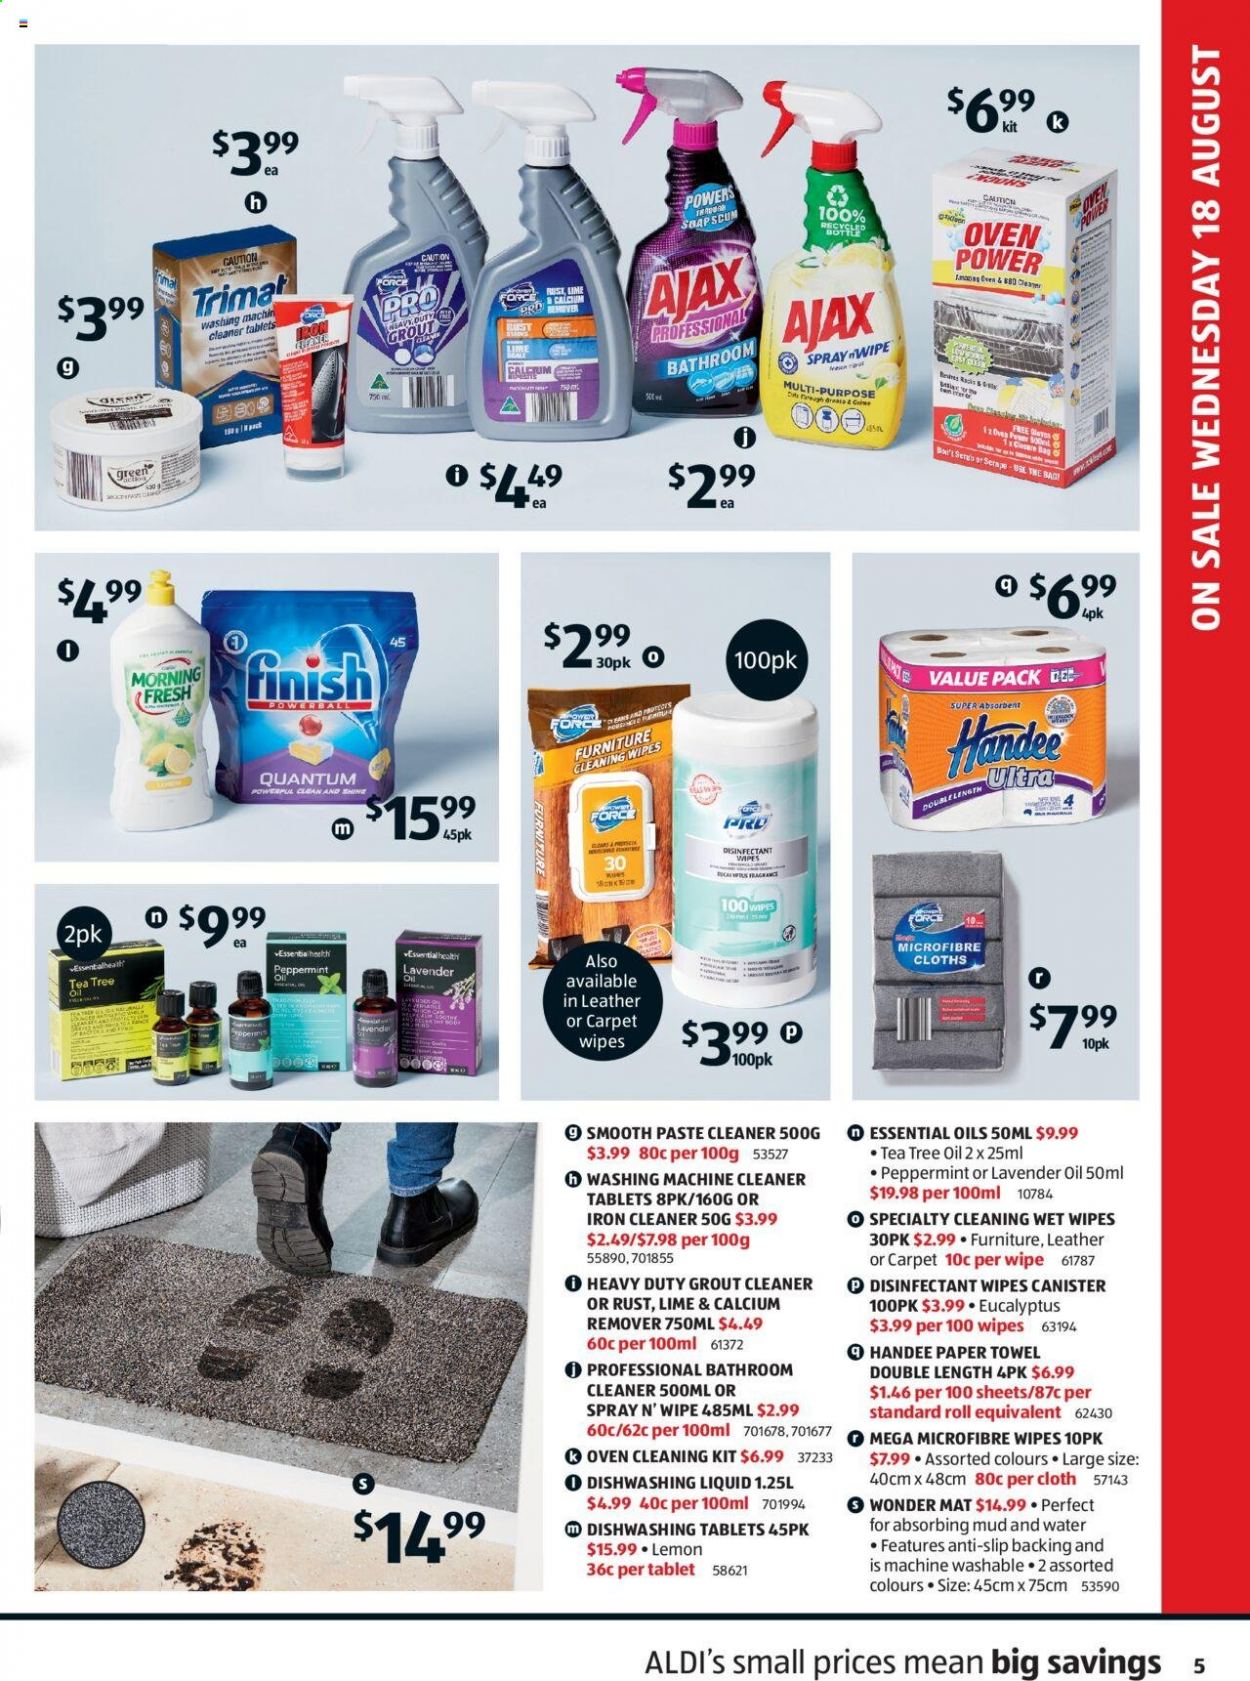 thumbnail - ALDI Catalogue - 18 Aug 2021 - 24 Aug 2021 - Sales products - oil, tea, cleansing wipes, wipes, Handee, paper towels, cleaner, desinfection, washing machine cleaner, Ajax, dishwashing liquid, soap, bag, canister, essential oils, iron, calcium, tea tree oil. Page 5.